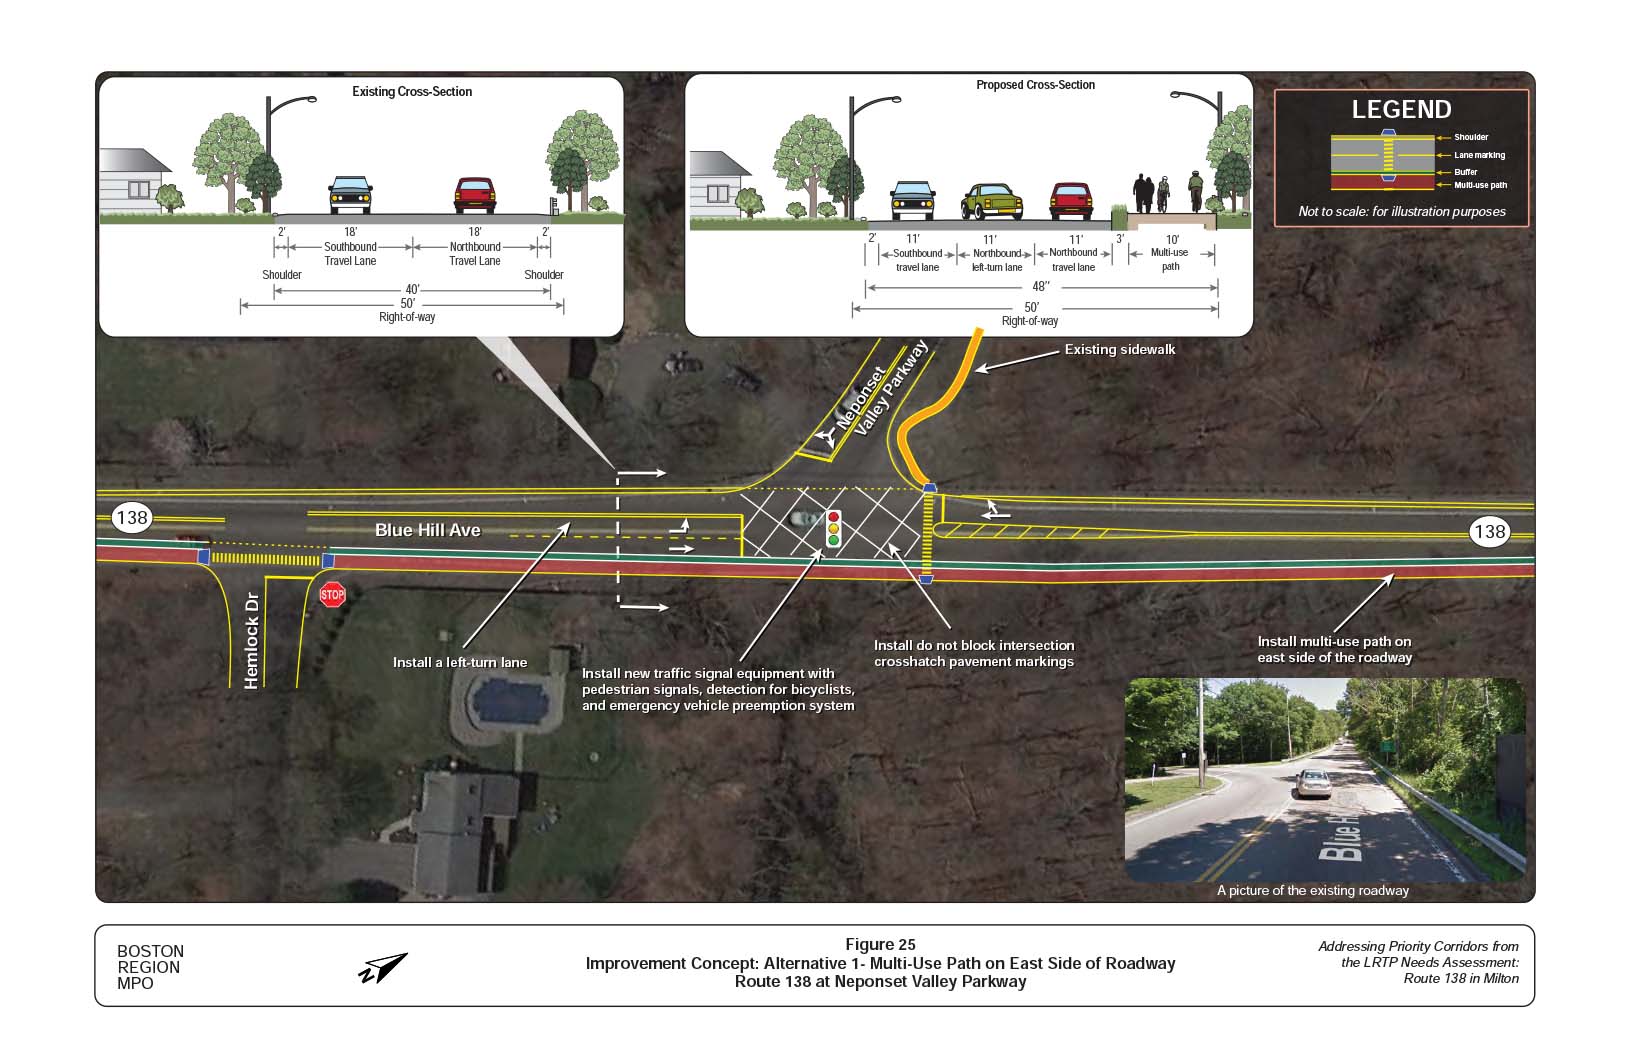 Figure 25 is an aerial photo of Route 138 at Neponset Valley Parkway showing Alternative 1, a multi-use path on the east side of the roadway, and overlays showing the existing and proposed cross-sections.